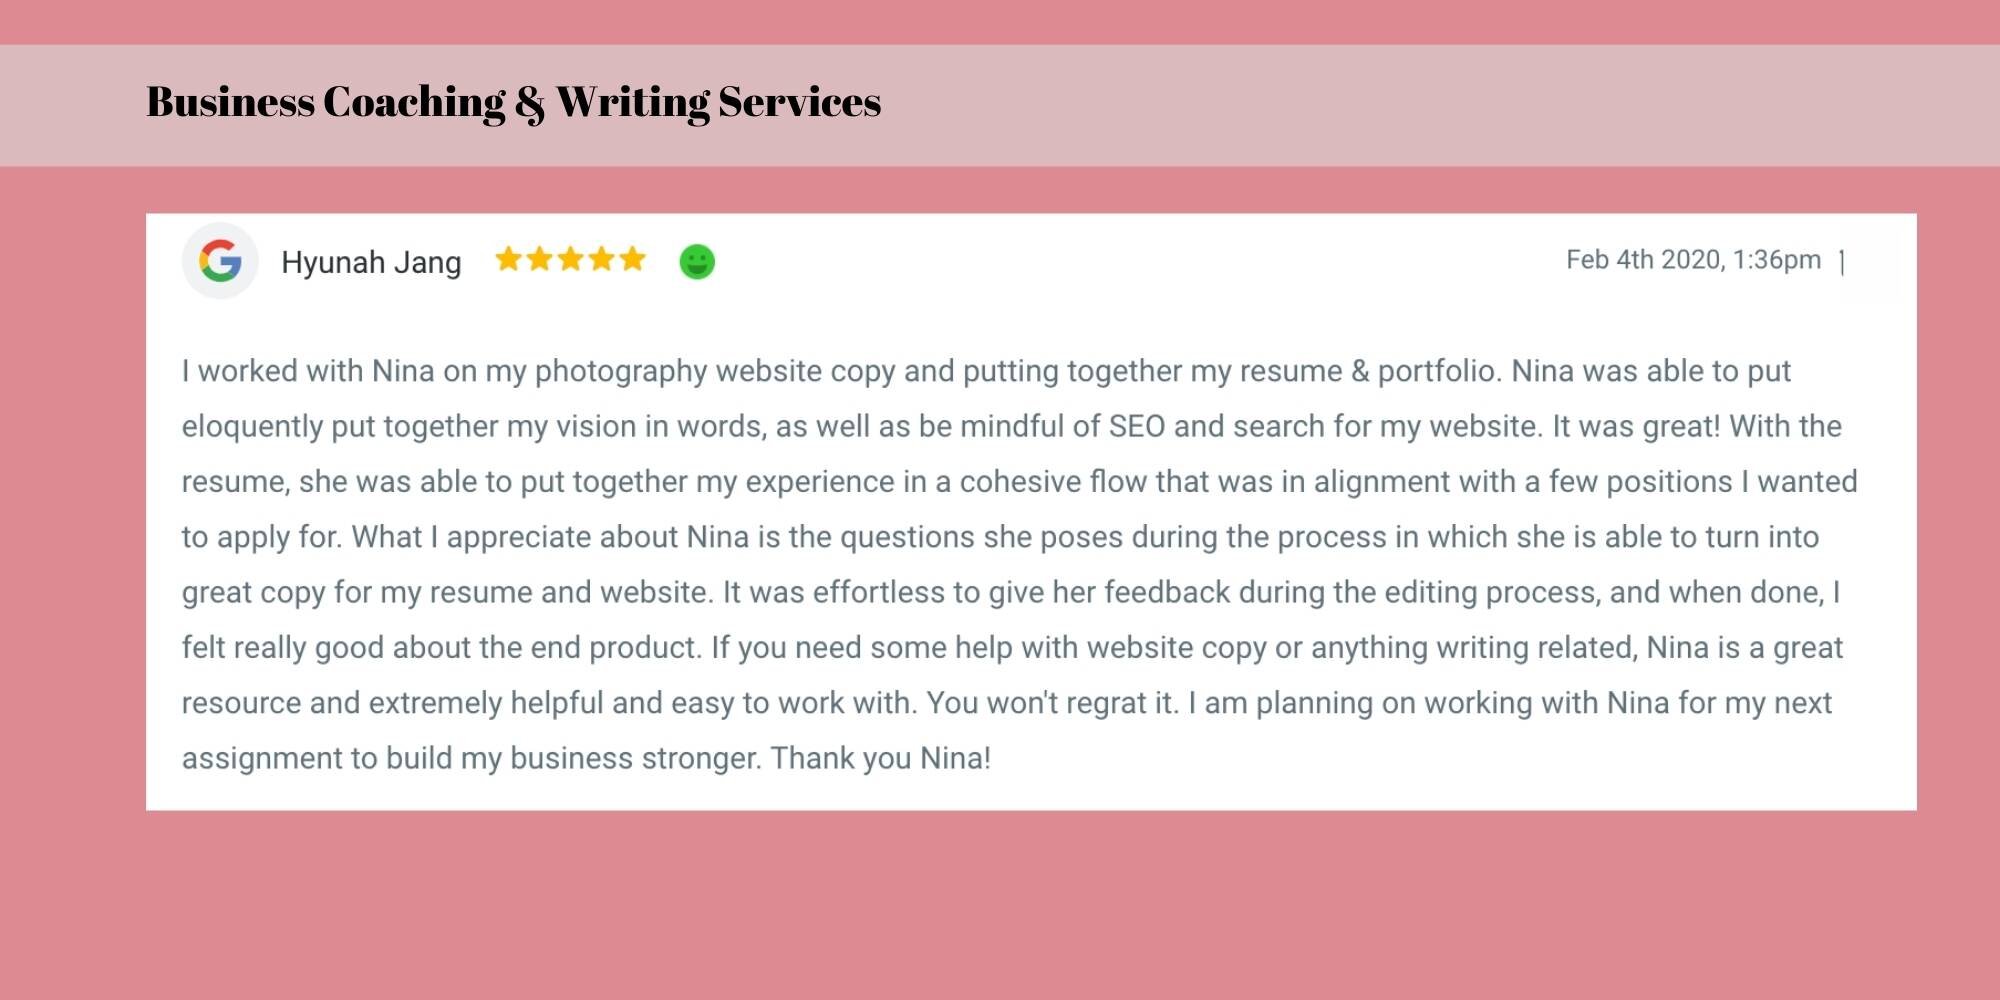 Hyunah - Business Coaching and Writing Services